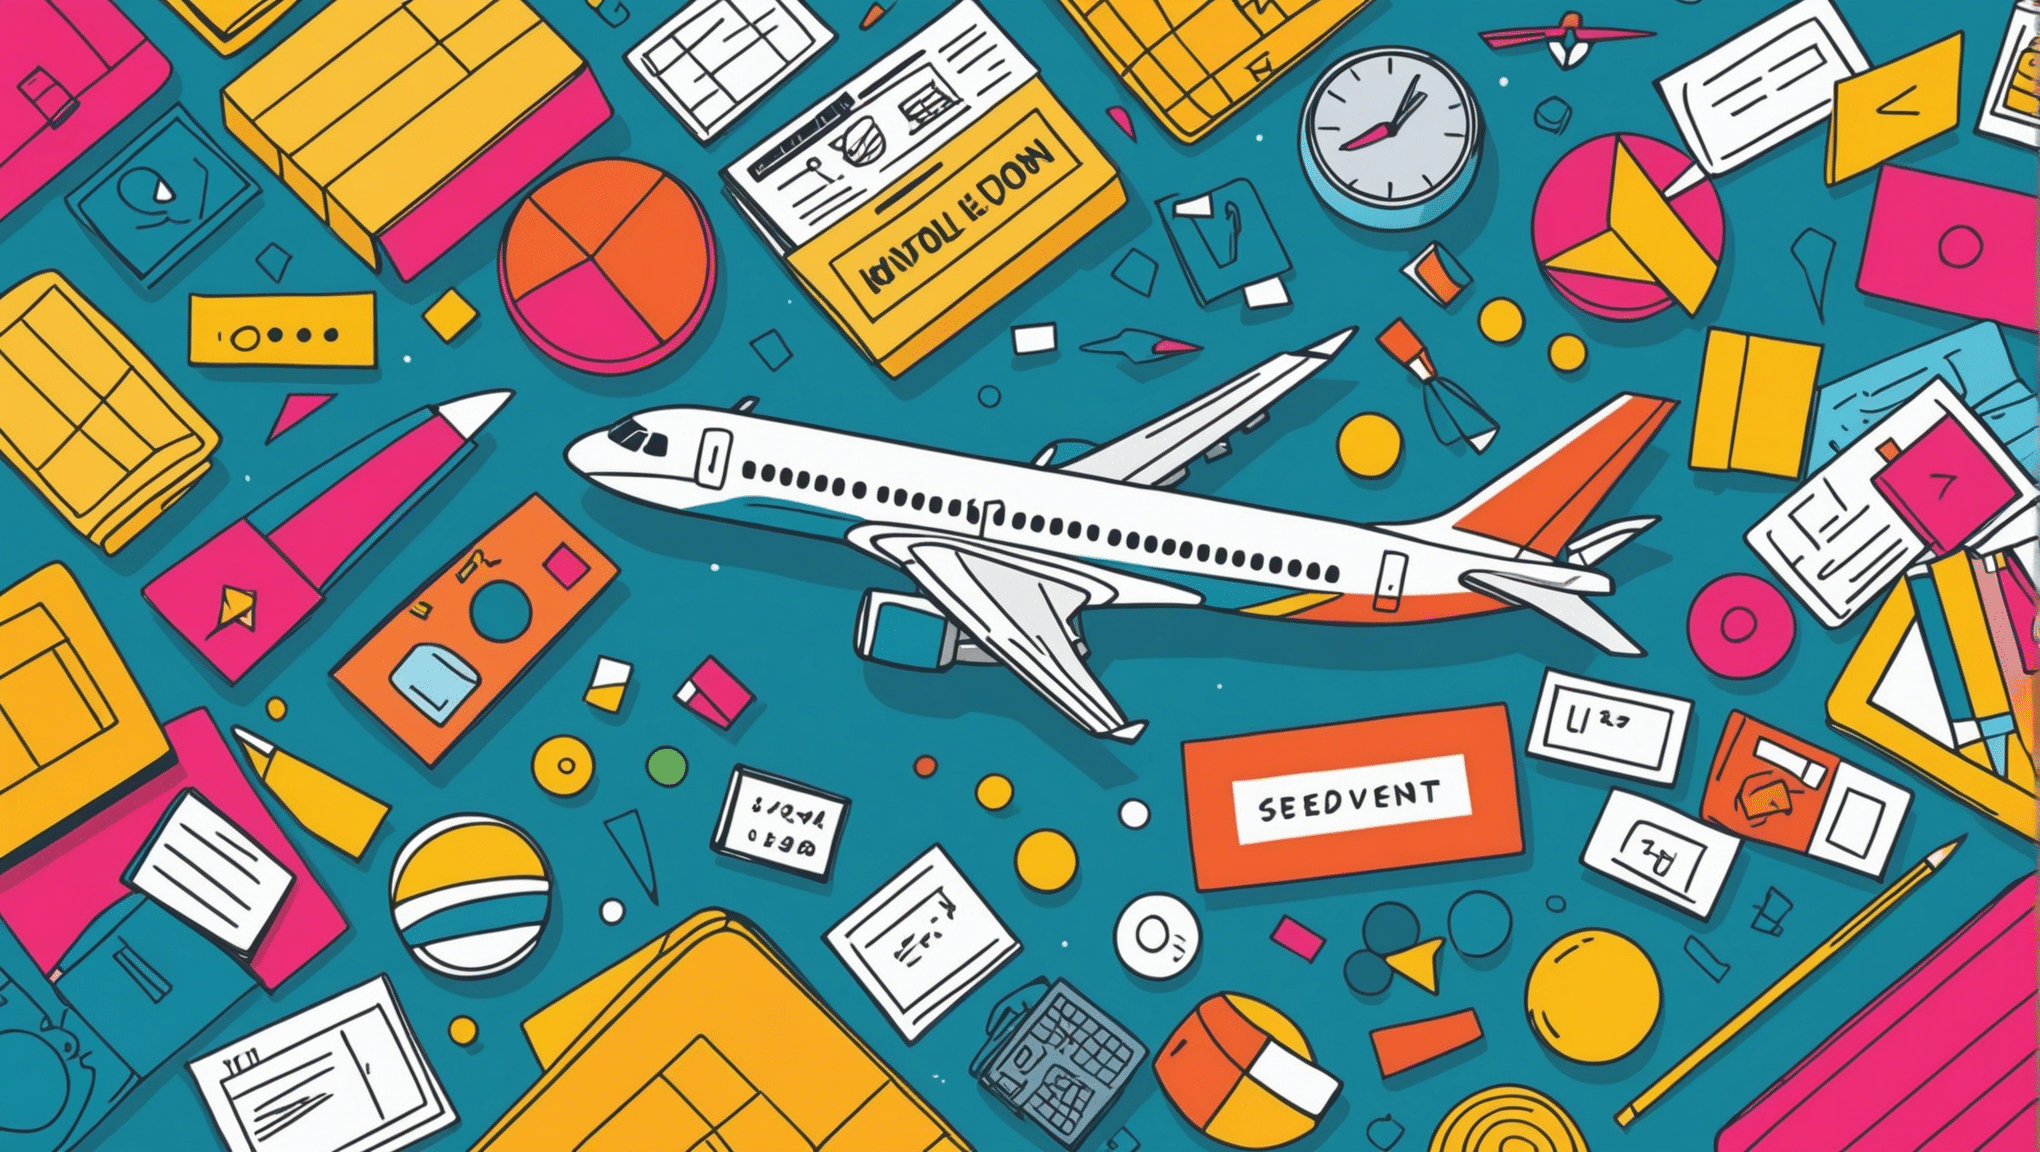 find out when to buy a plane ticket at the best time to save on your travels with our practical advice.